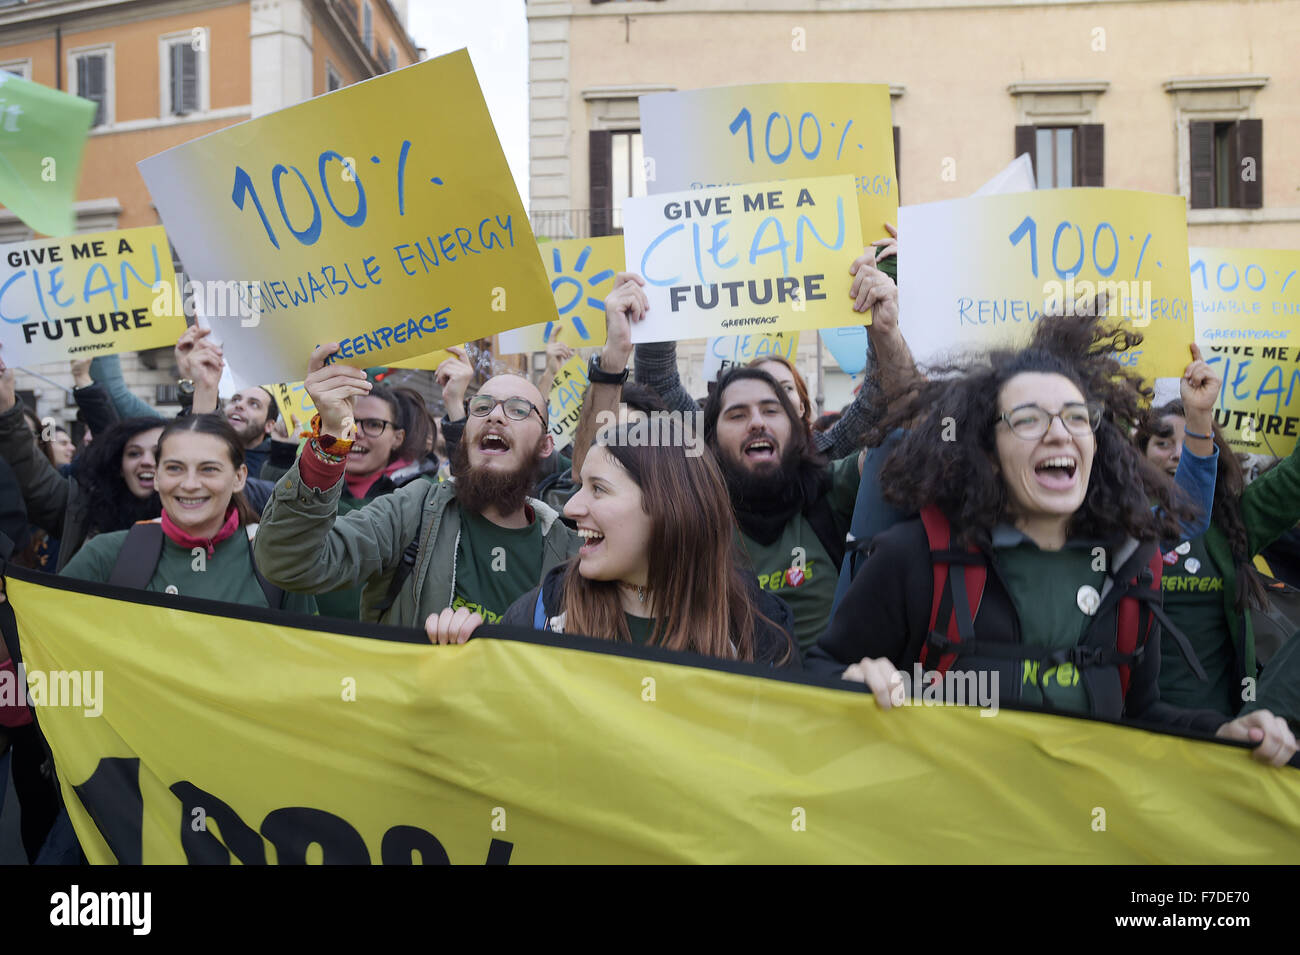 Nov. 29, 2015 - Europe, Italy, Rome, november 29, 2015 :Demonstrators march during a rally calling for action on climate change on November 29, 2015 in Rome a day before the launch of the COP21 conference in Paris. Some 150 leaders including US President Barack Obama, China's Xi Jinping, India's Narendra Modi and Russia's Vladimir Putin will attend the start of the UN conference Monday, tasked with reaching the first truly universal climate pact. The goal is to limit average global warming to two degrees Celsius (3.6 degrees Fahrenheit), perhaps less, over pre-Industrial Revolution levels by c Stock Photo